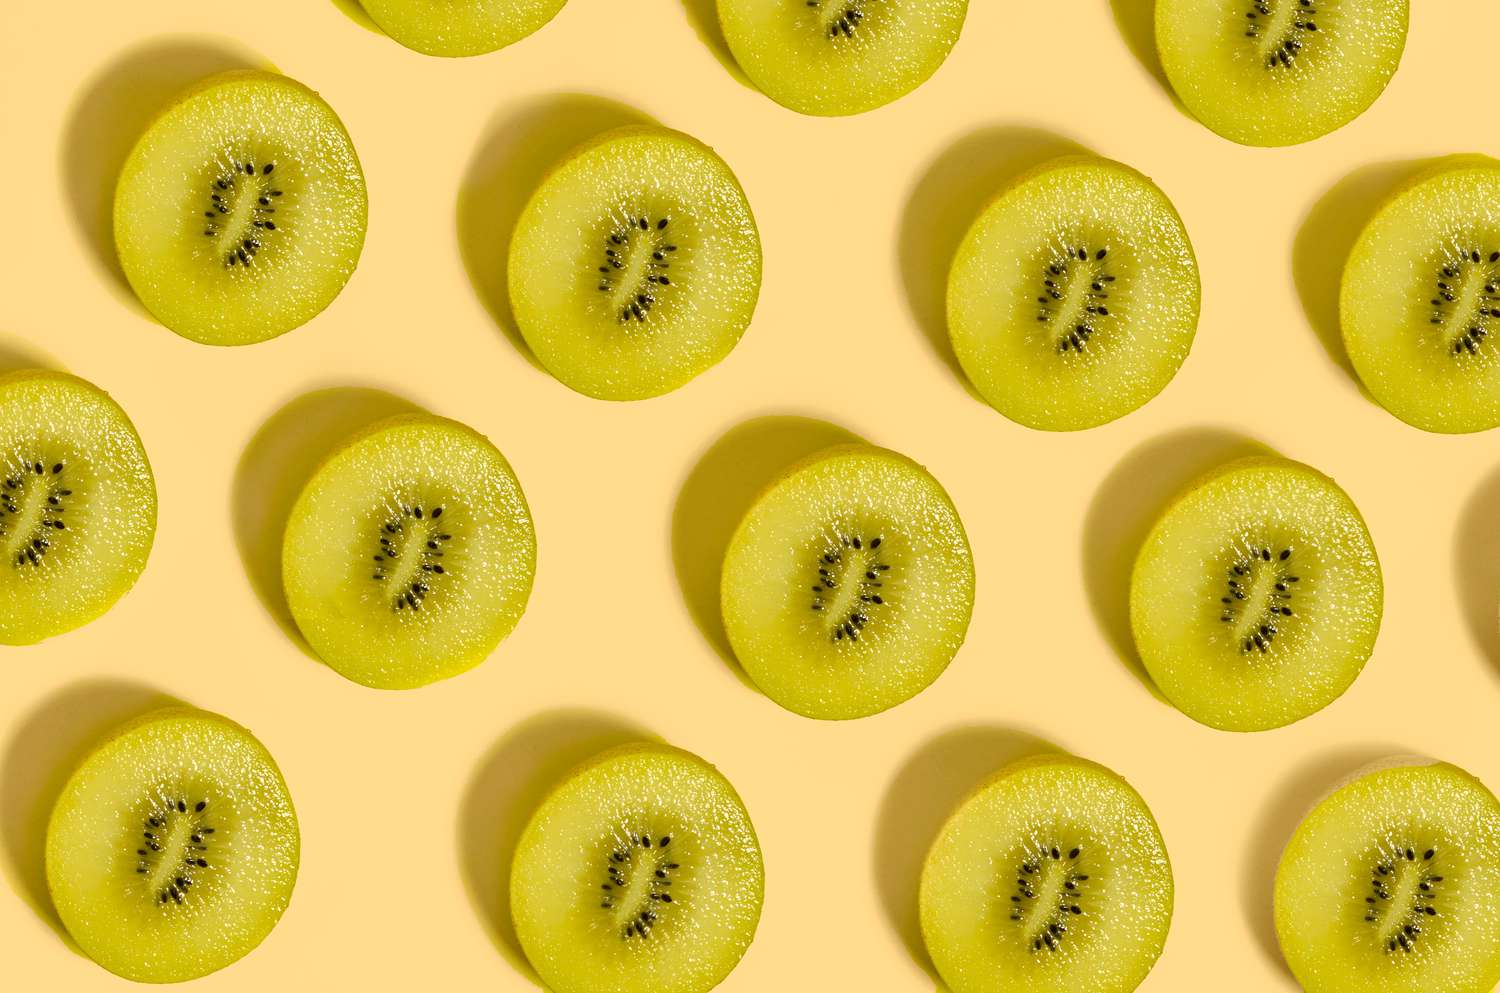 Slices of green kiwi fruit on a pale yellow background